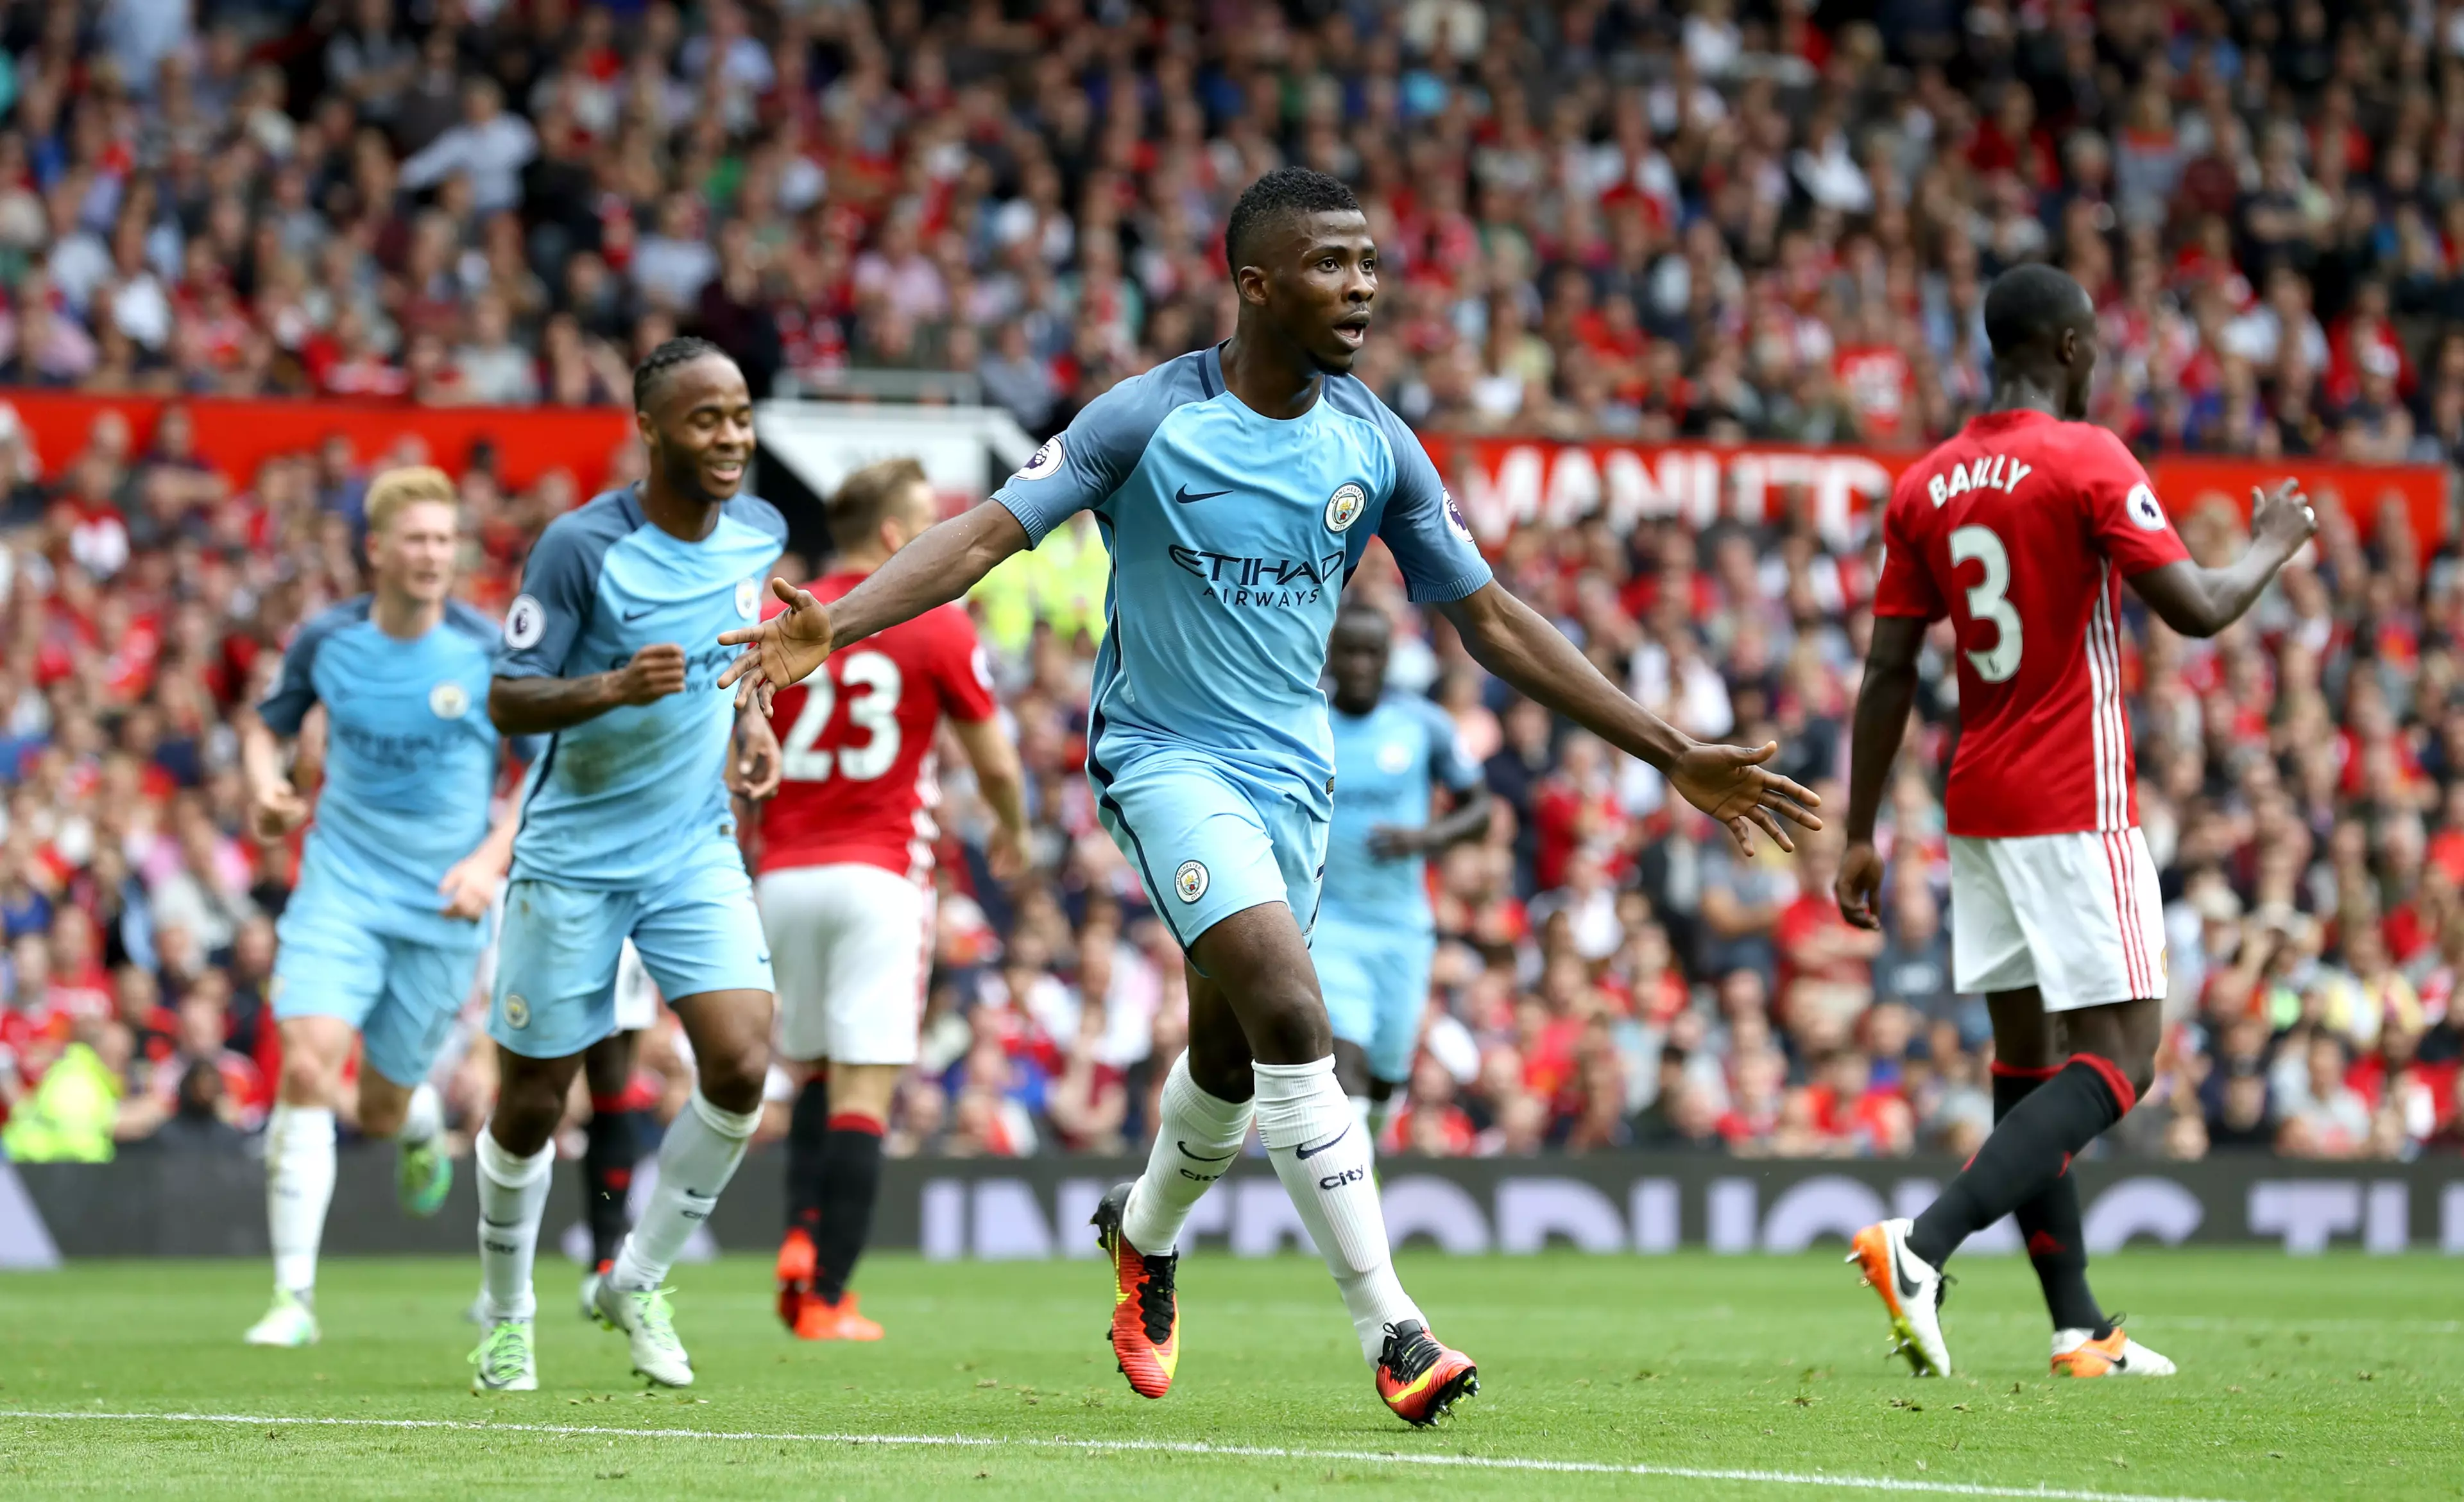 Kelechi Iheanacho Becomes A Record Breaker During Manchester Derby